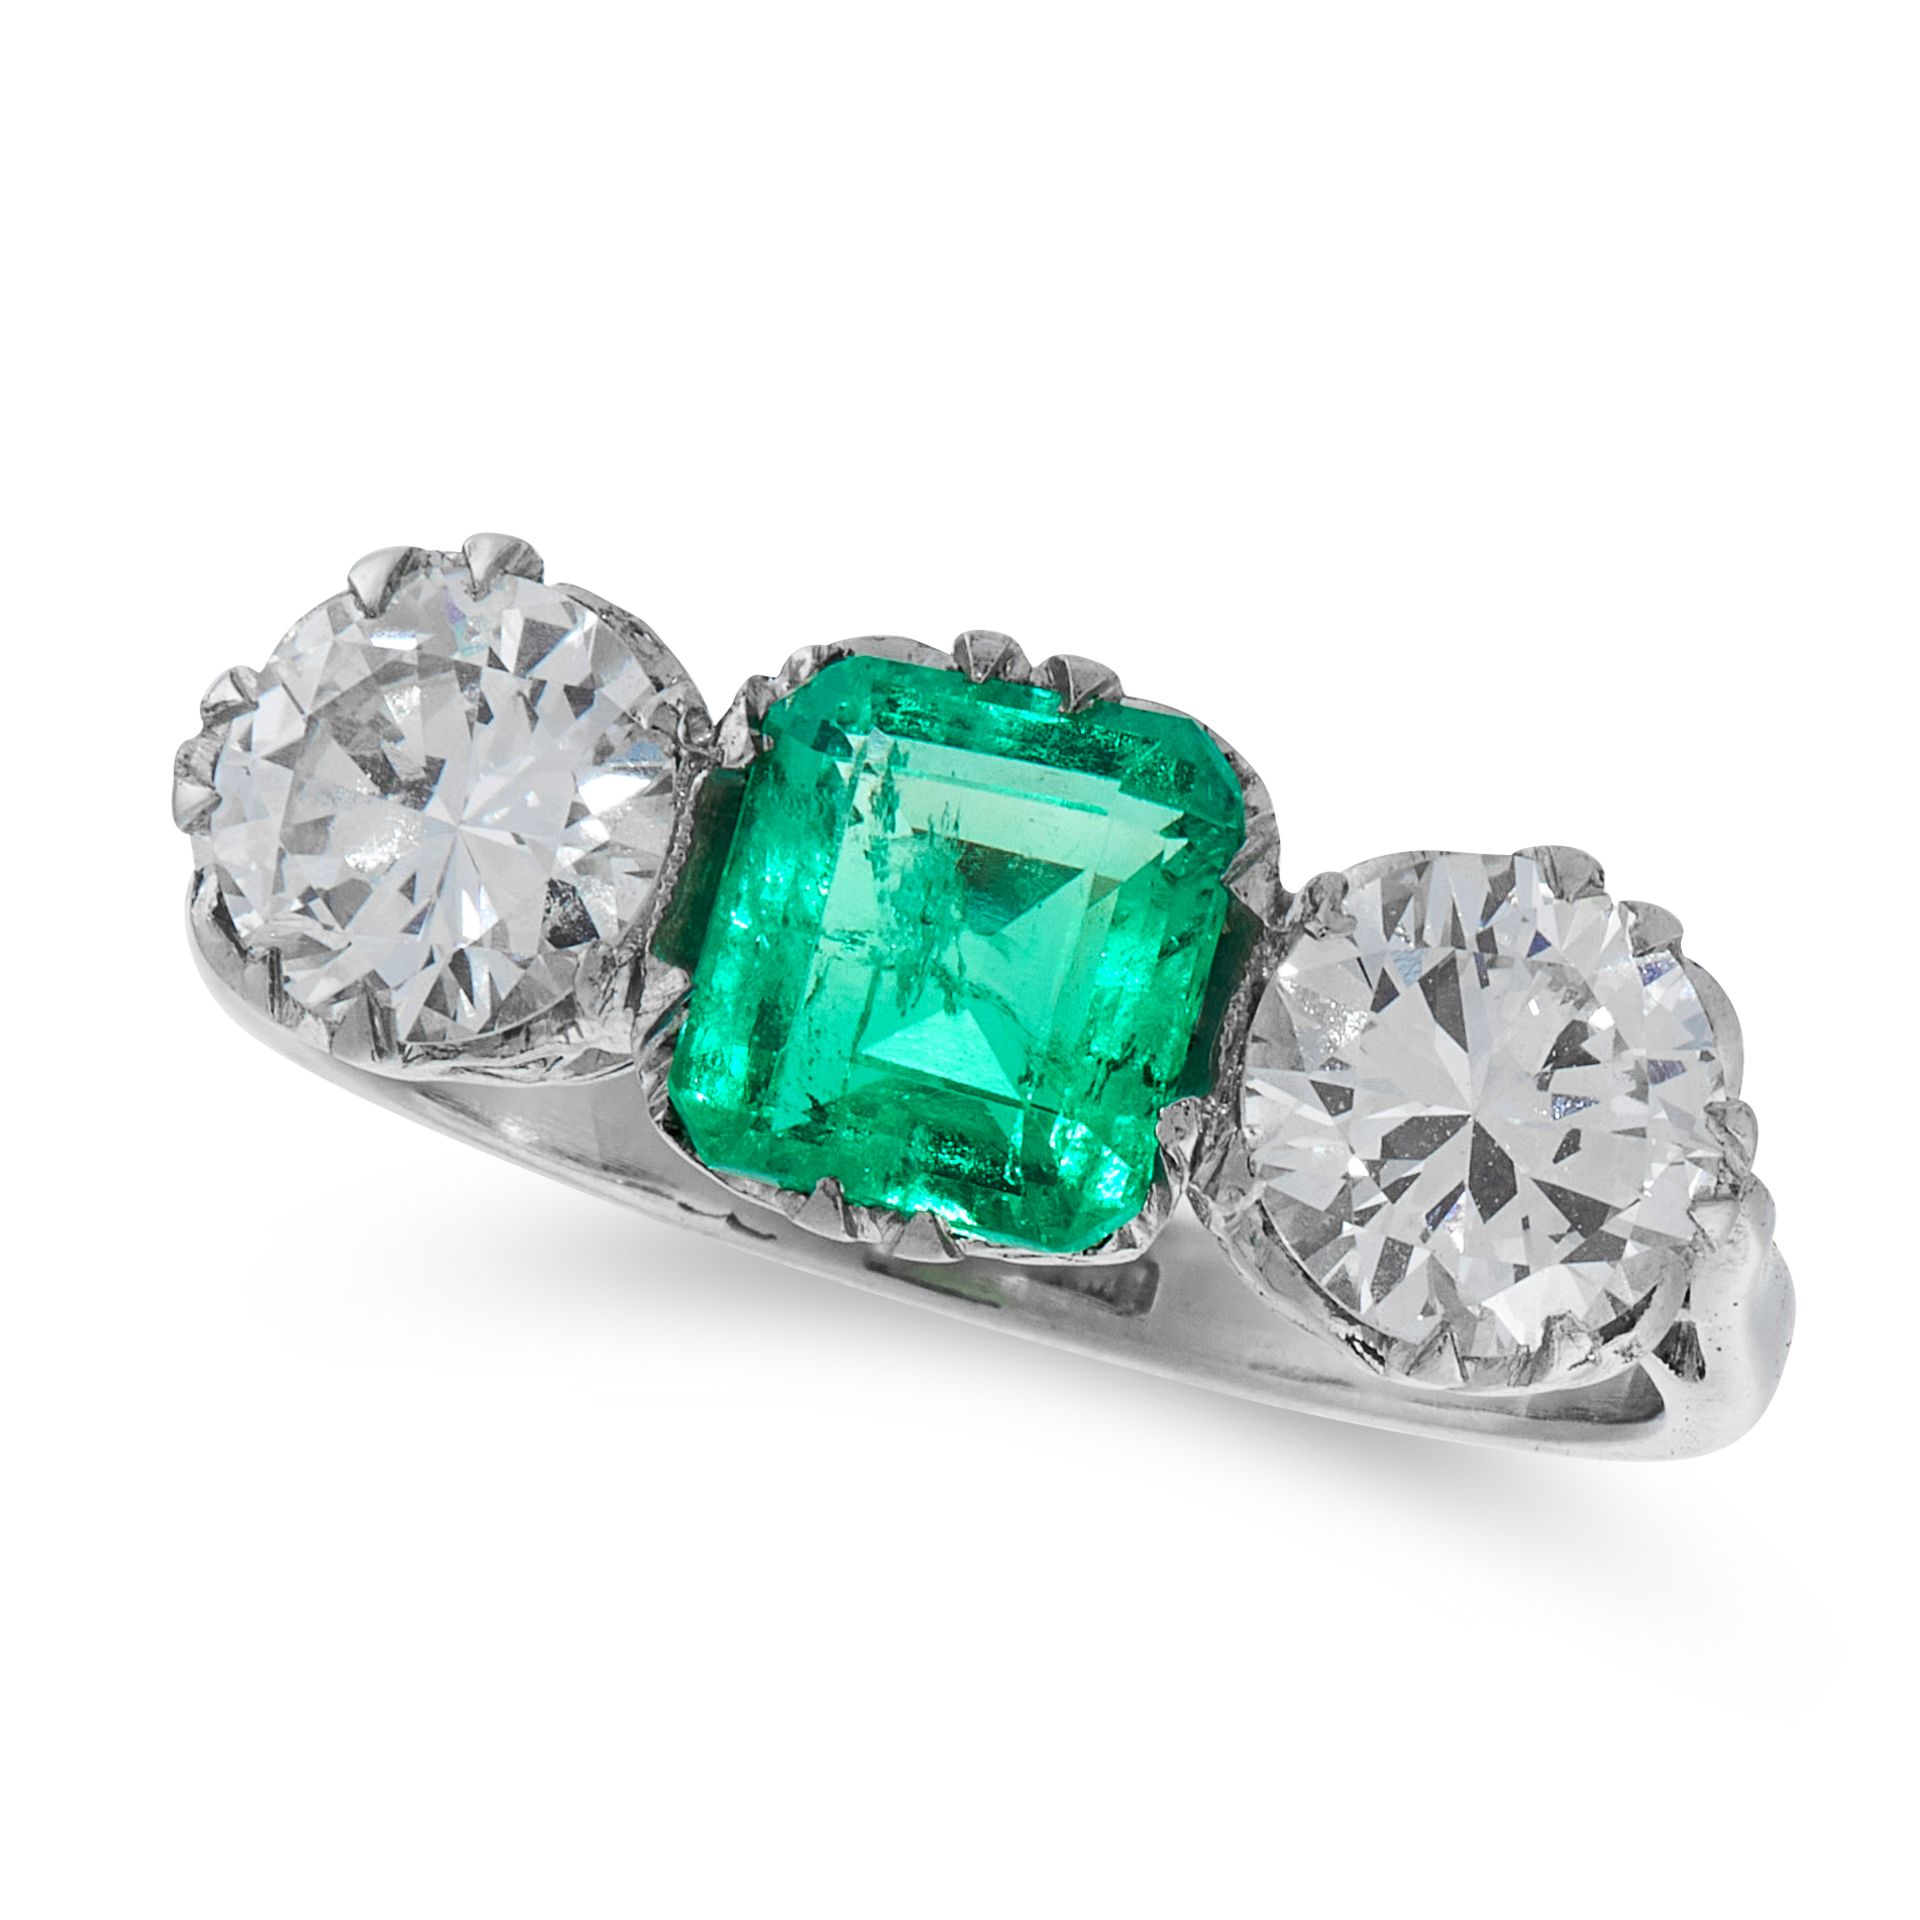 A COLOMBIAN EMERALD AND DIAMOND RING in platinum, set with a cushion cut emerald between two round